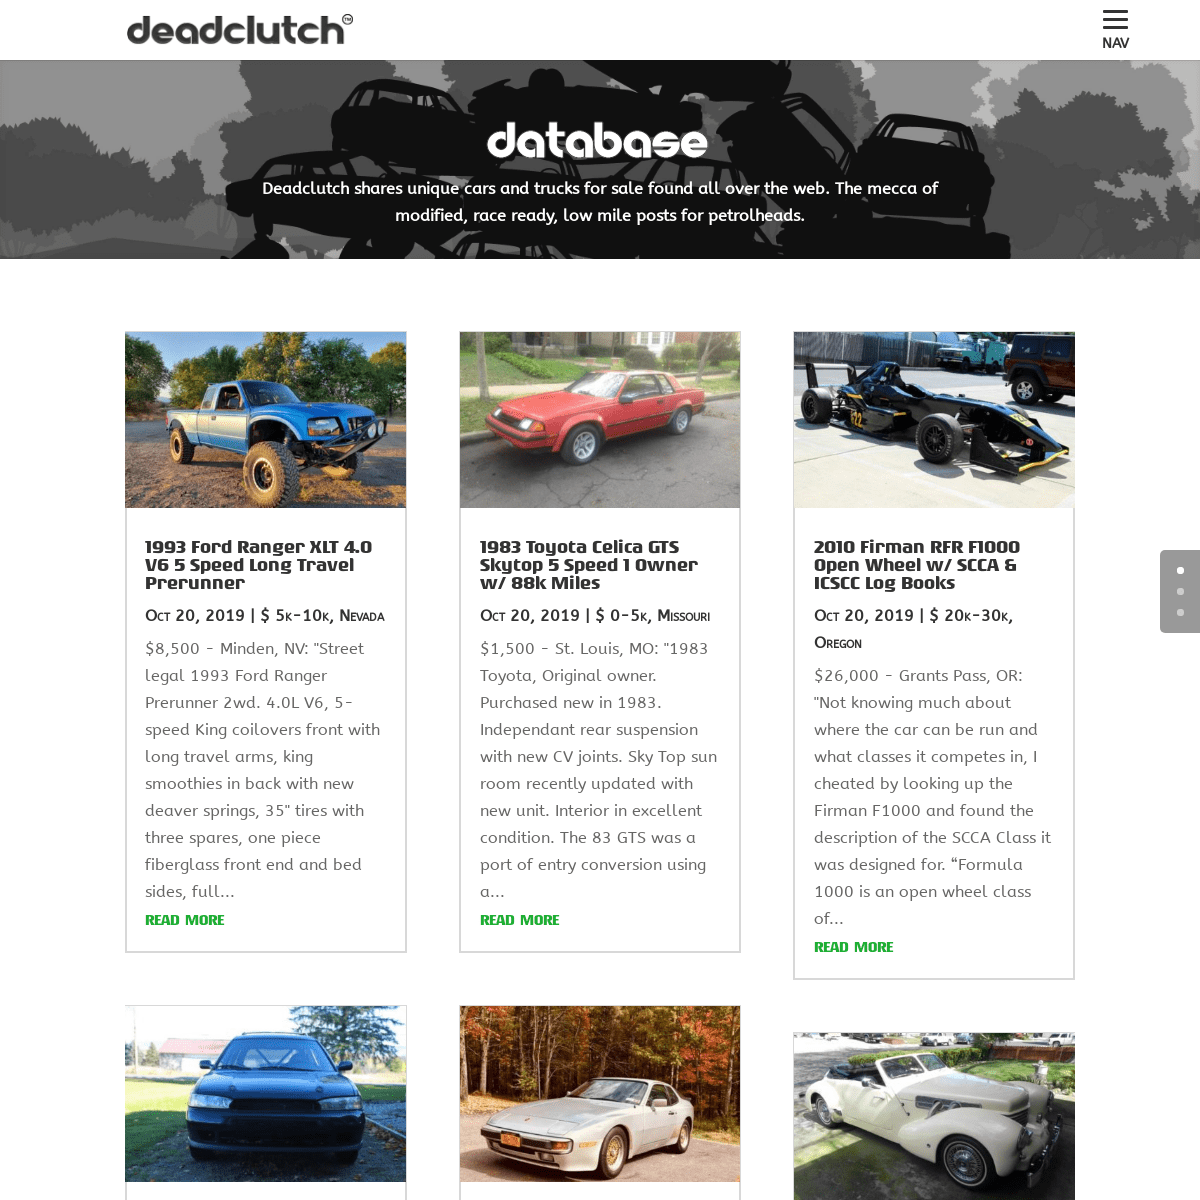 A complete backup of deadclutch.com